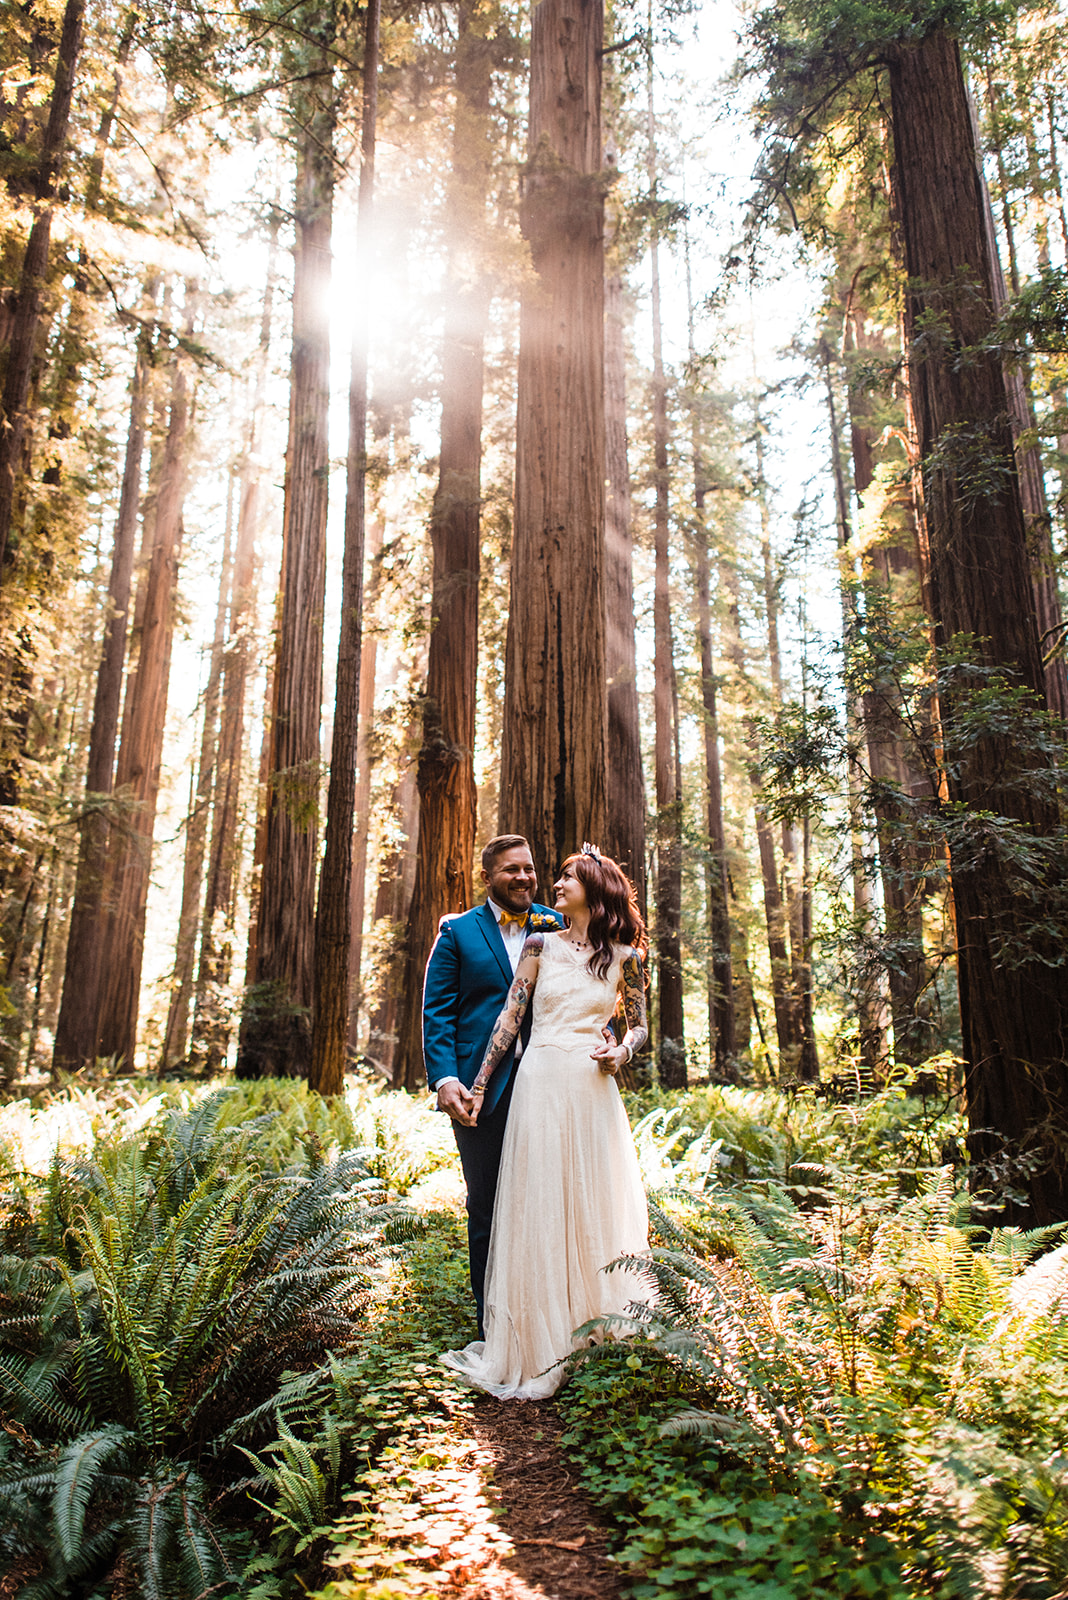 A Redwoods Coastal Elopement. Image: The Foxes Photography